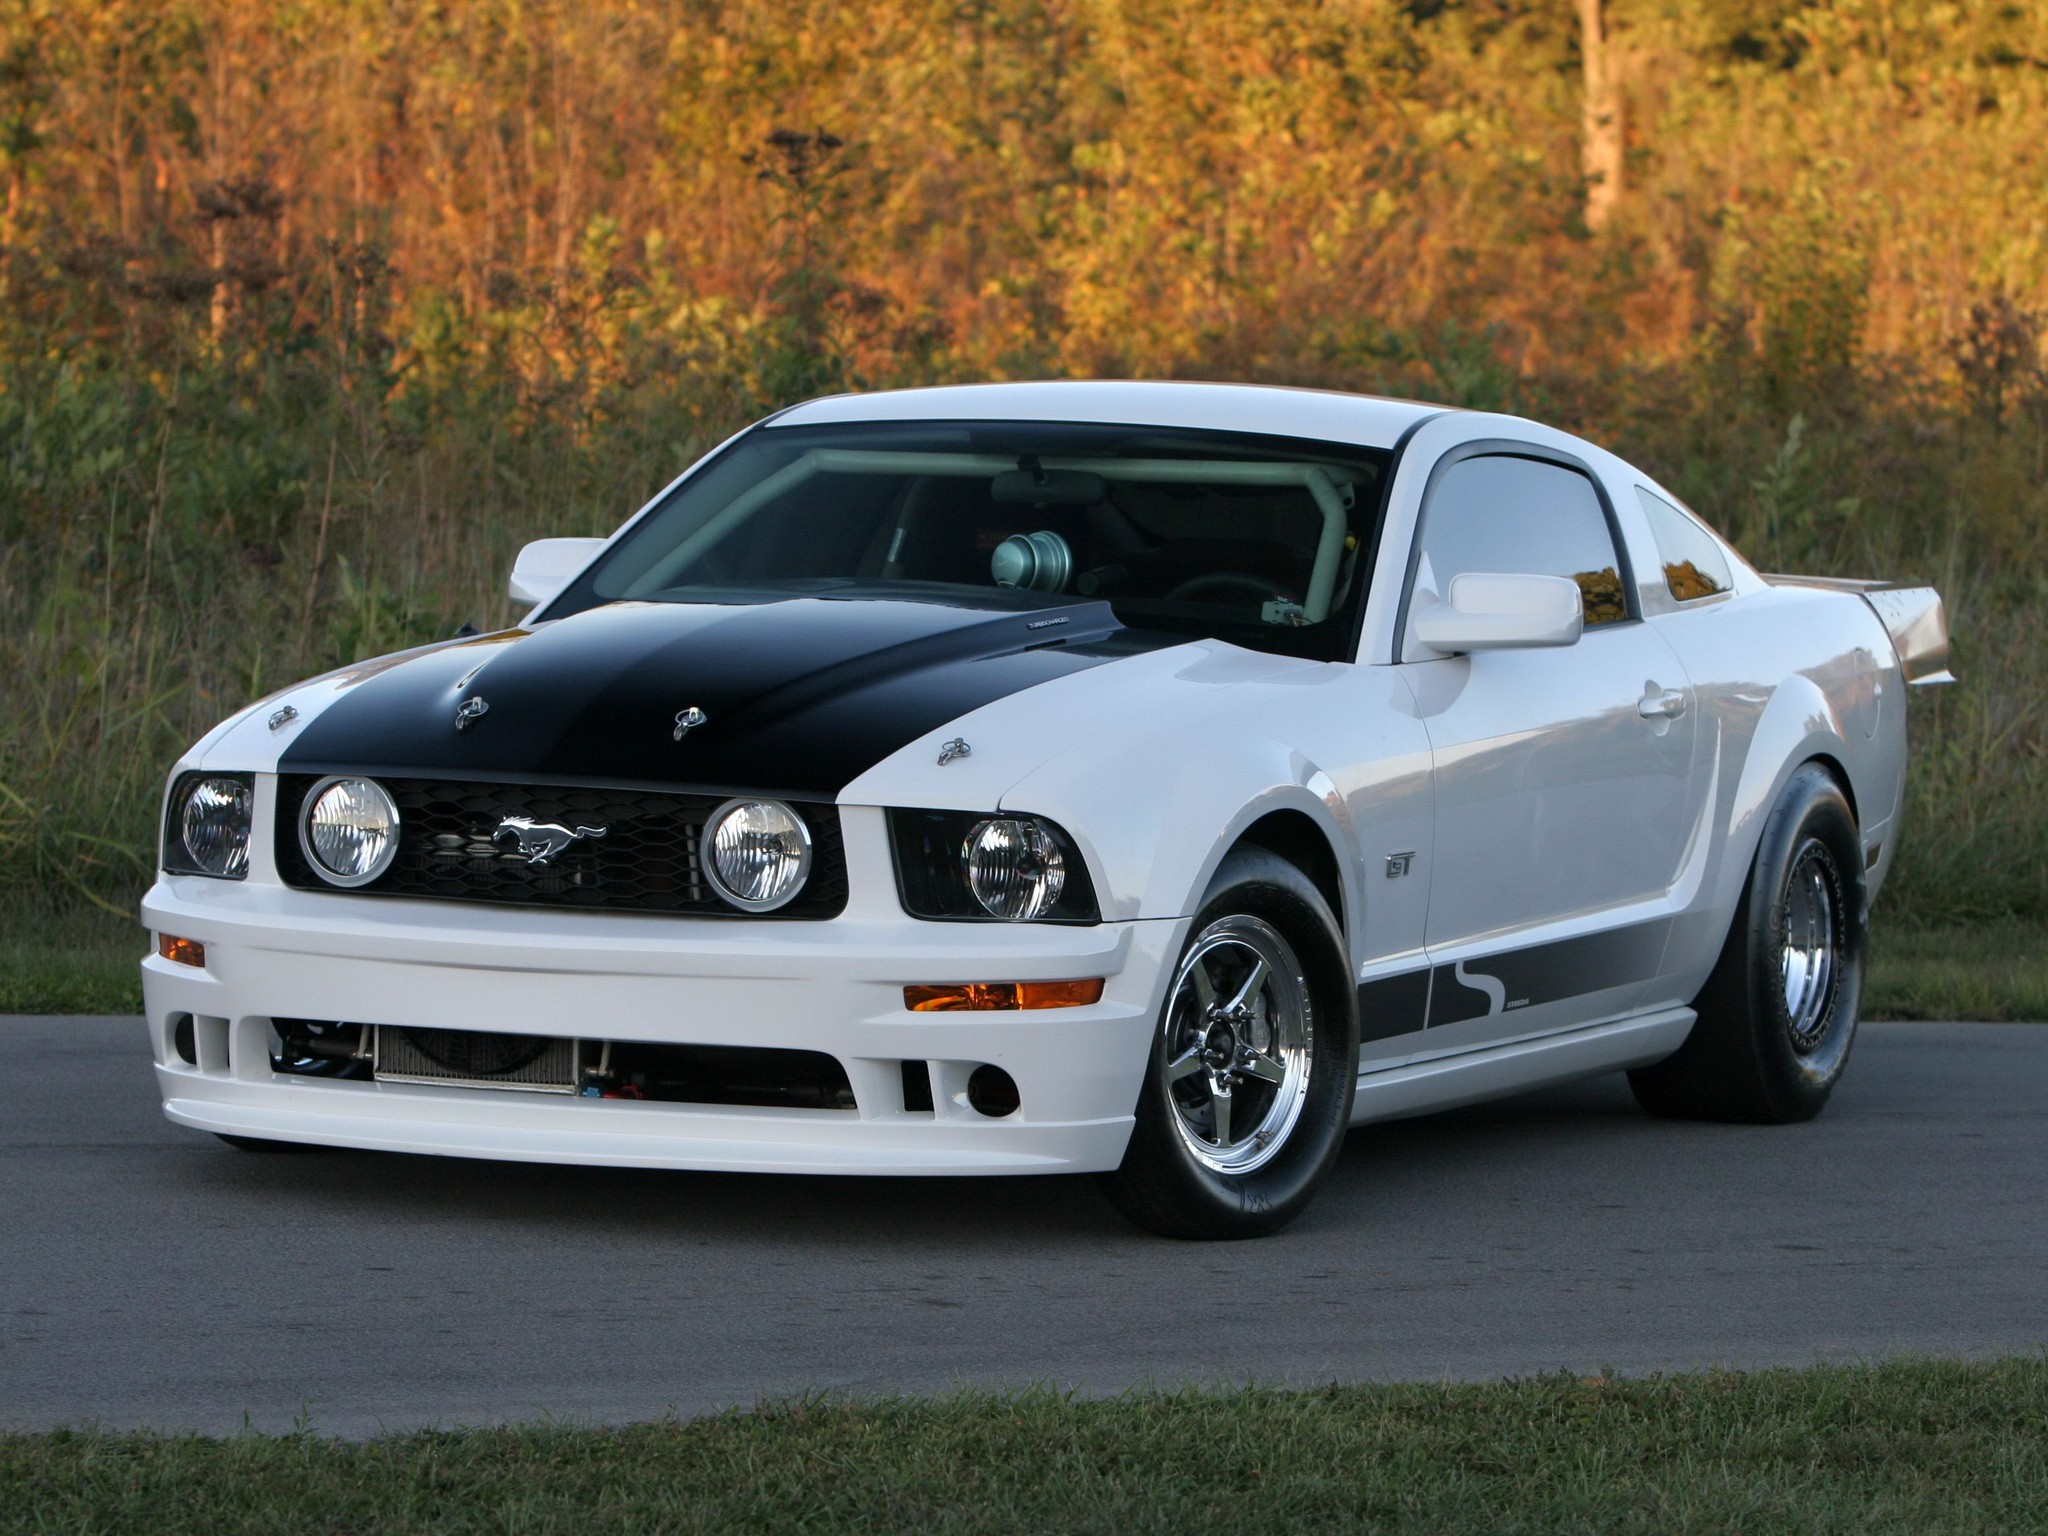 General 2048x1536 car vehicle Ford Mustang Ford white cars Ford Mustang S-197